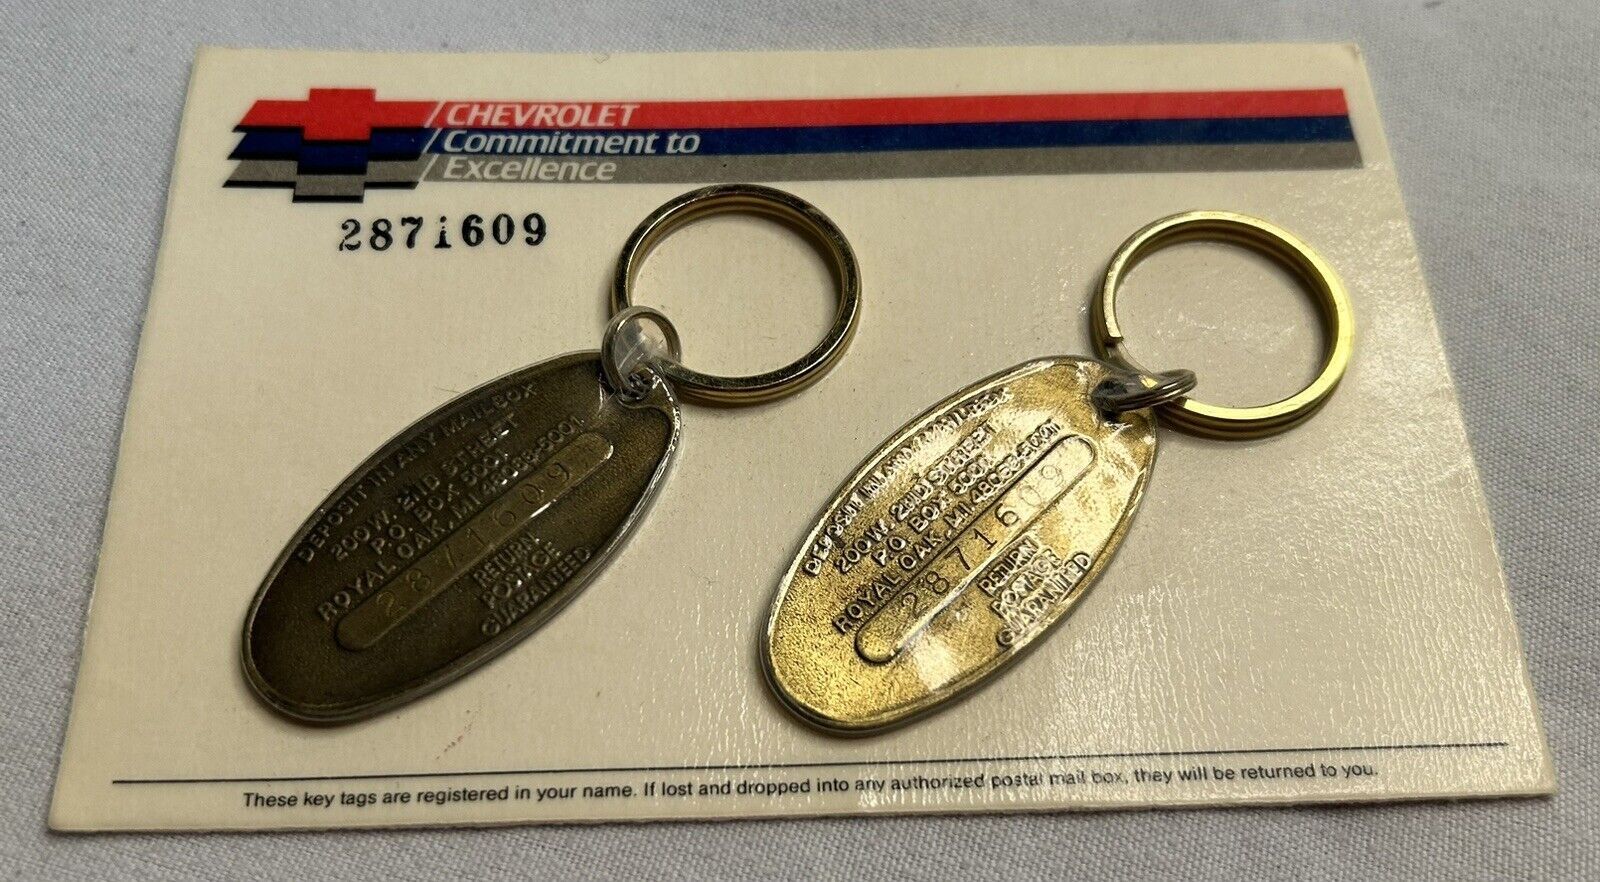 Vint. Chevrolet Commitment to Excellence Brass Keychains in ORIGINAL PACKAGING